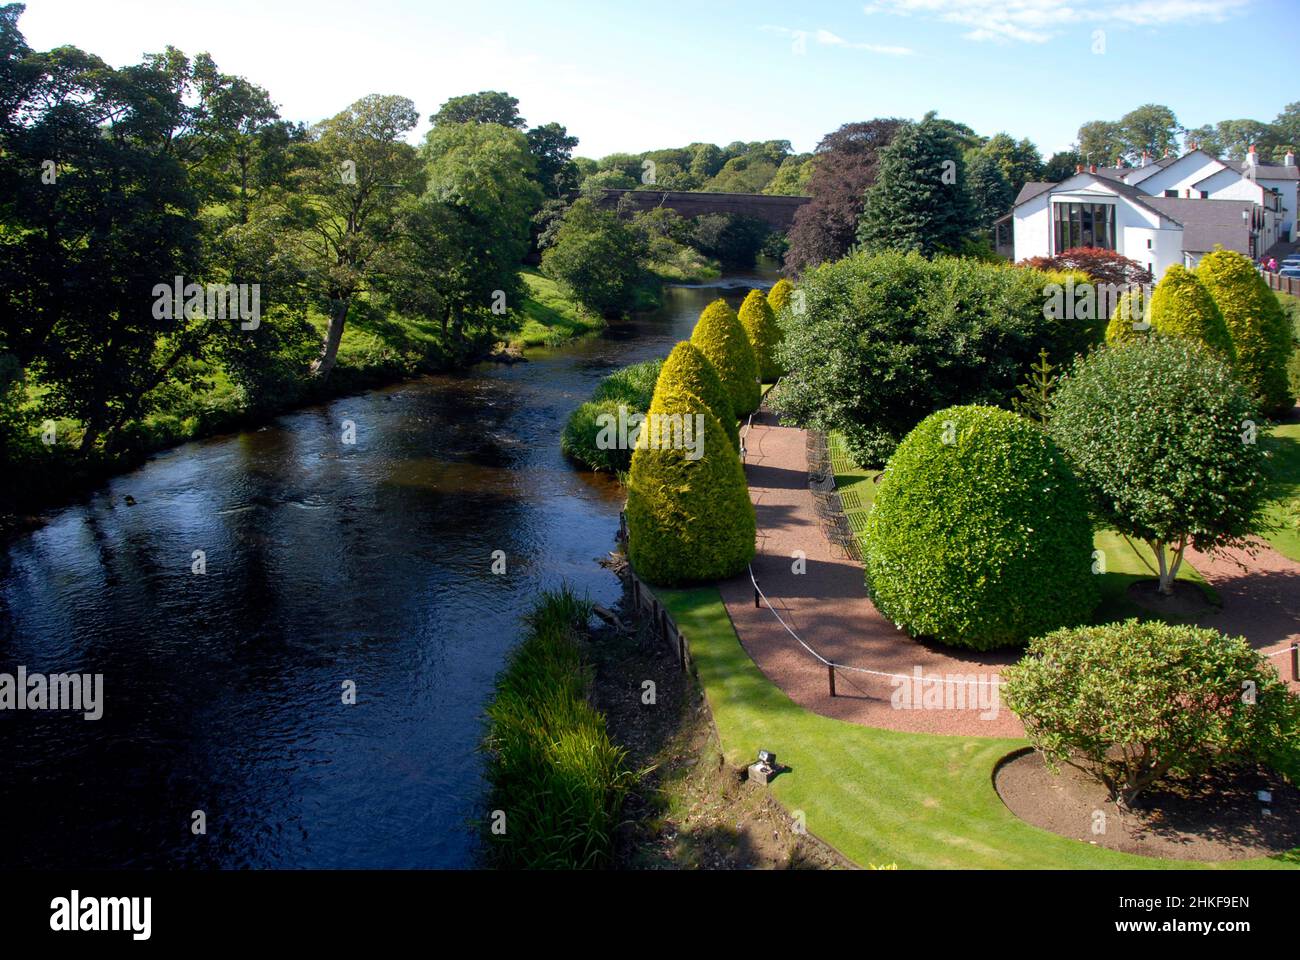 View of river Doon and attractive gardens from Brig o' Doon, Ayrshire, Scotland with trees providing shade Stock Photo